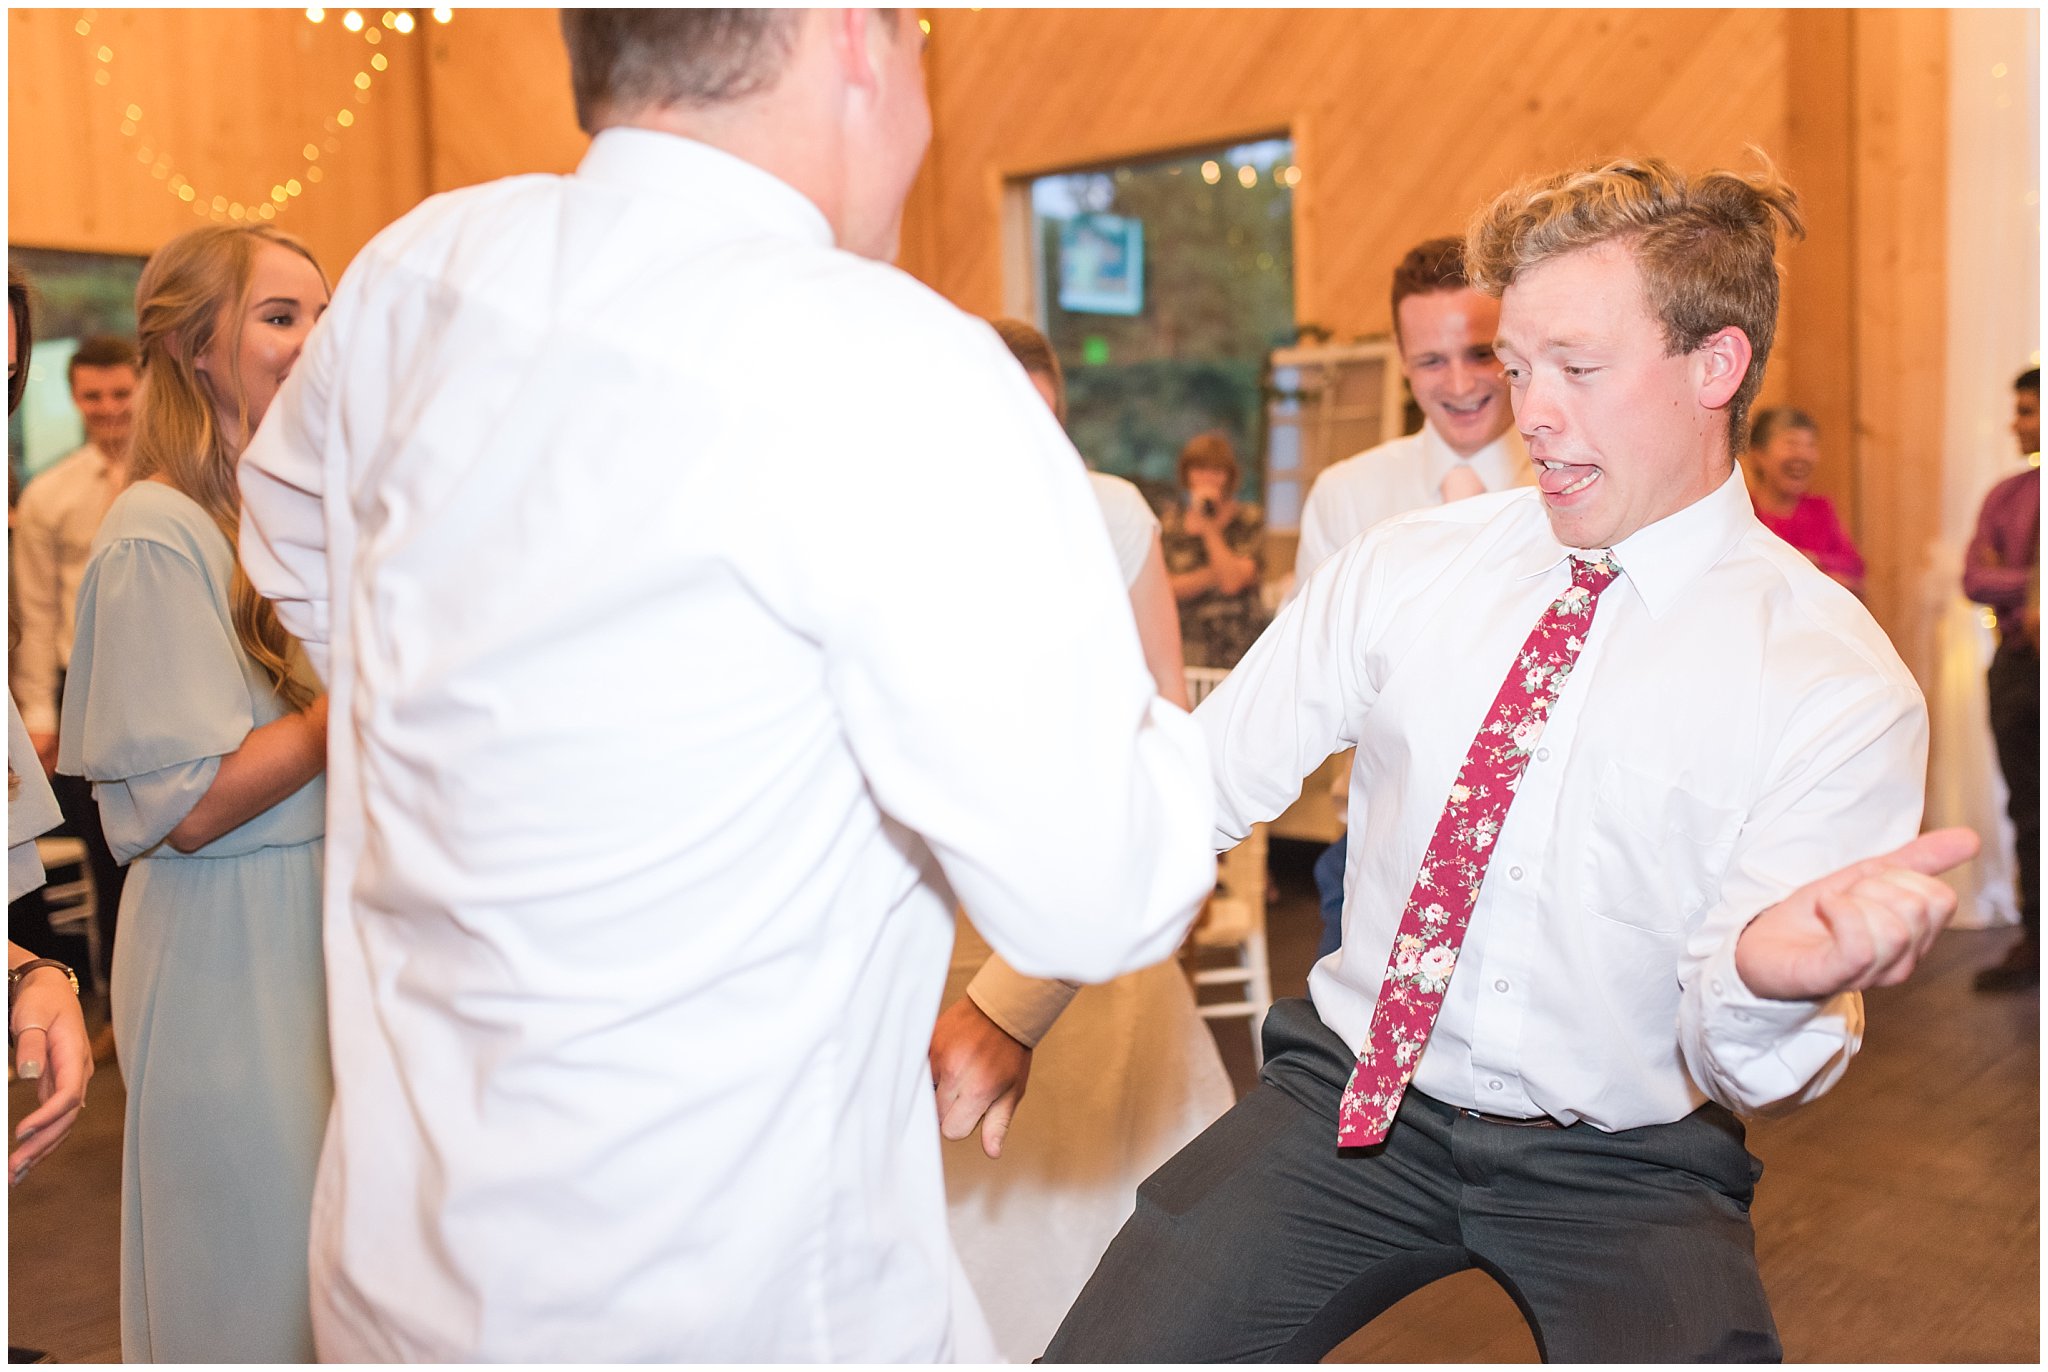 Party dancing at reception | Oak Hills Reception and Events Center | Jessie and Dallin Photography